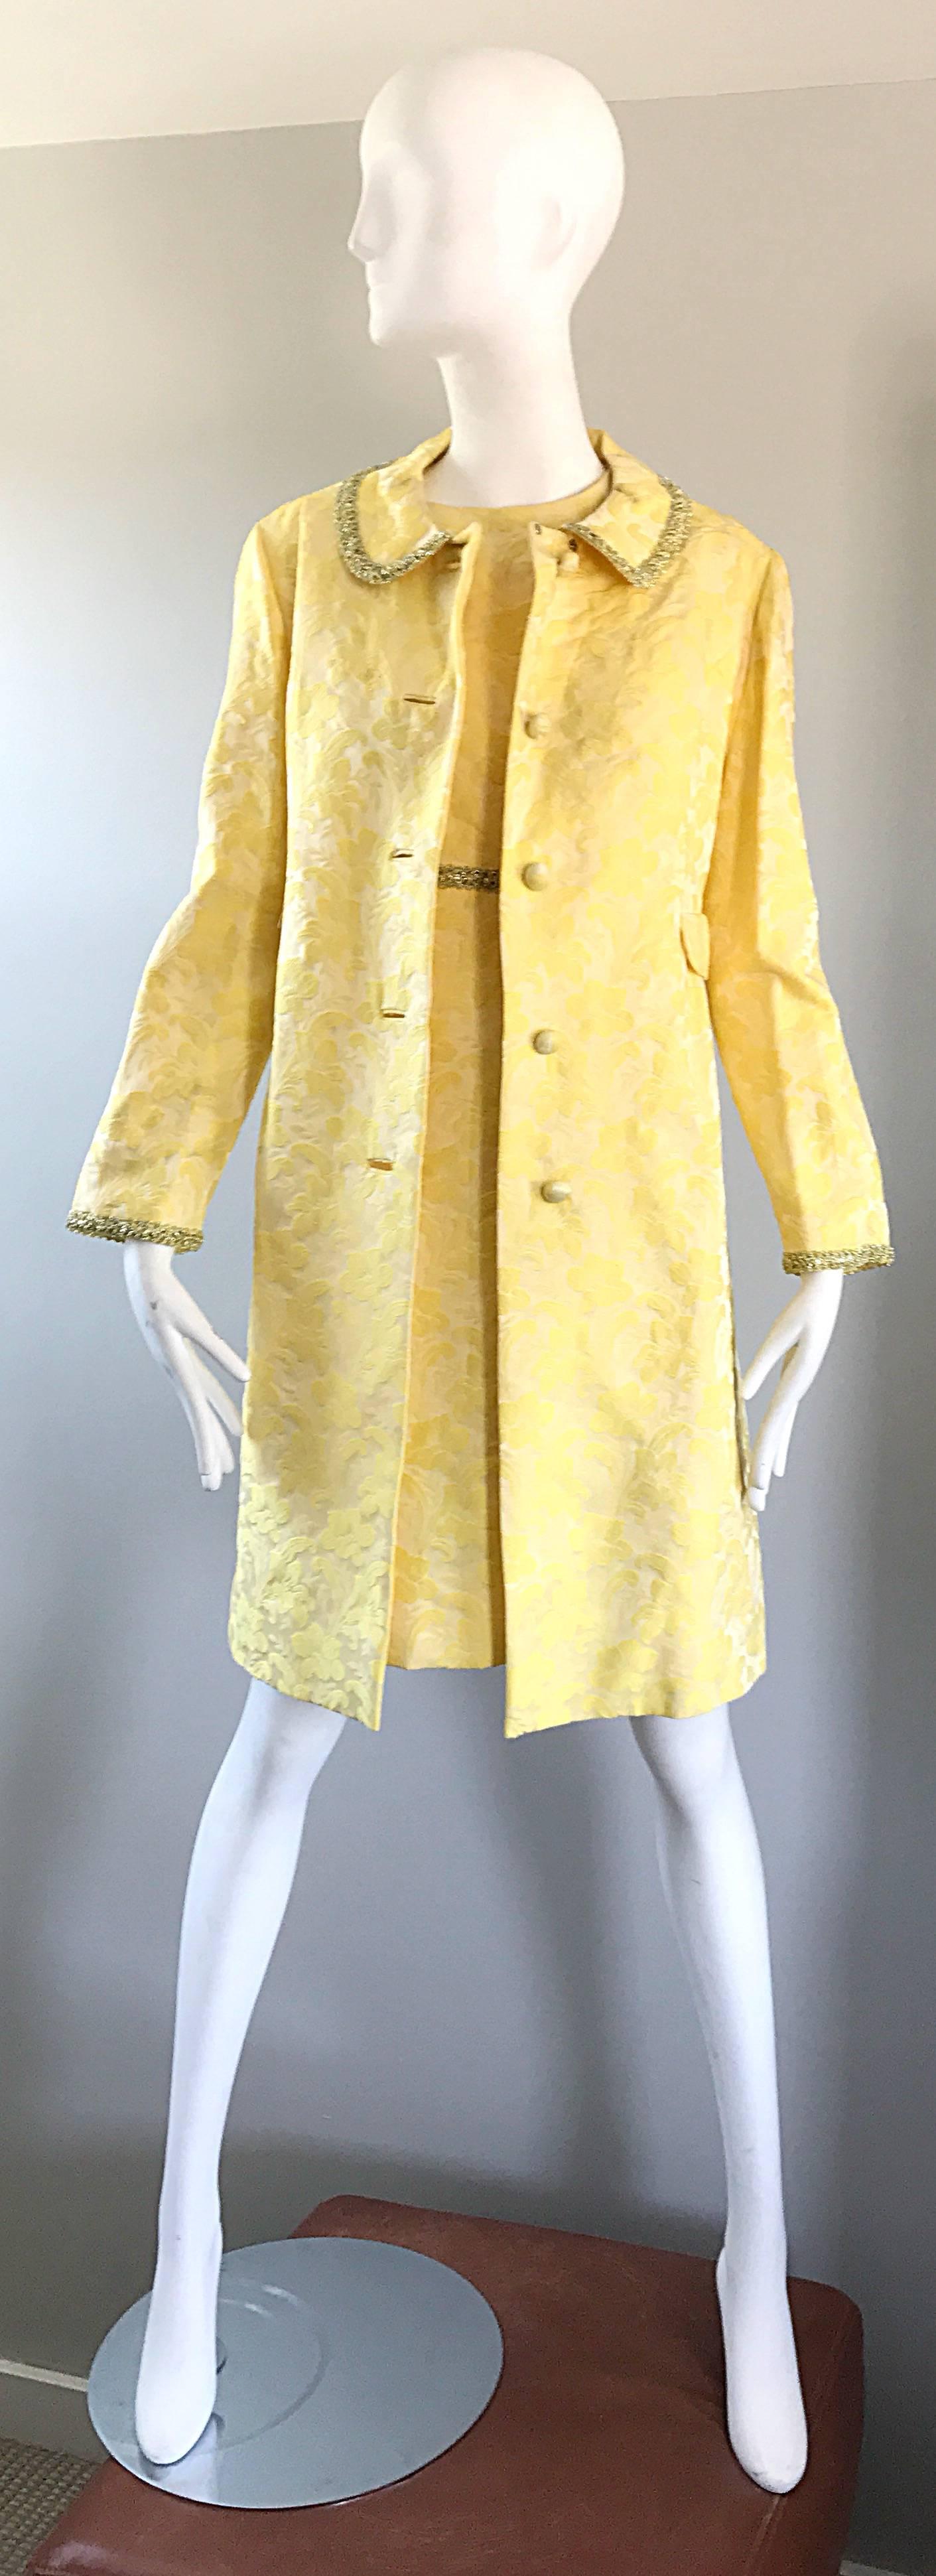 Chic 1960s Mademoiselle Canary Yellow Silk Borcade A - Line Dress & Jacket Suit For Sale 2